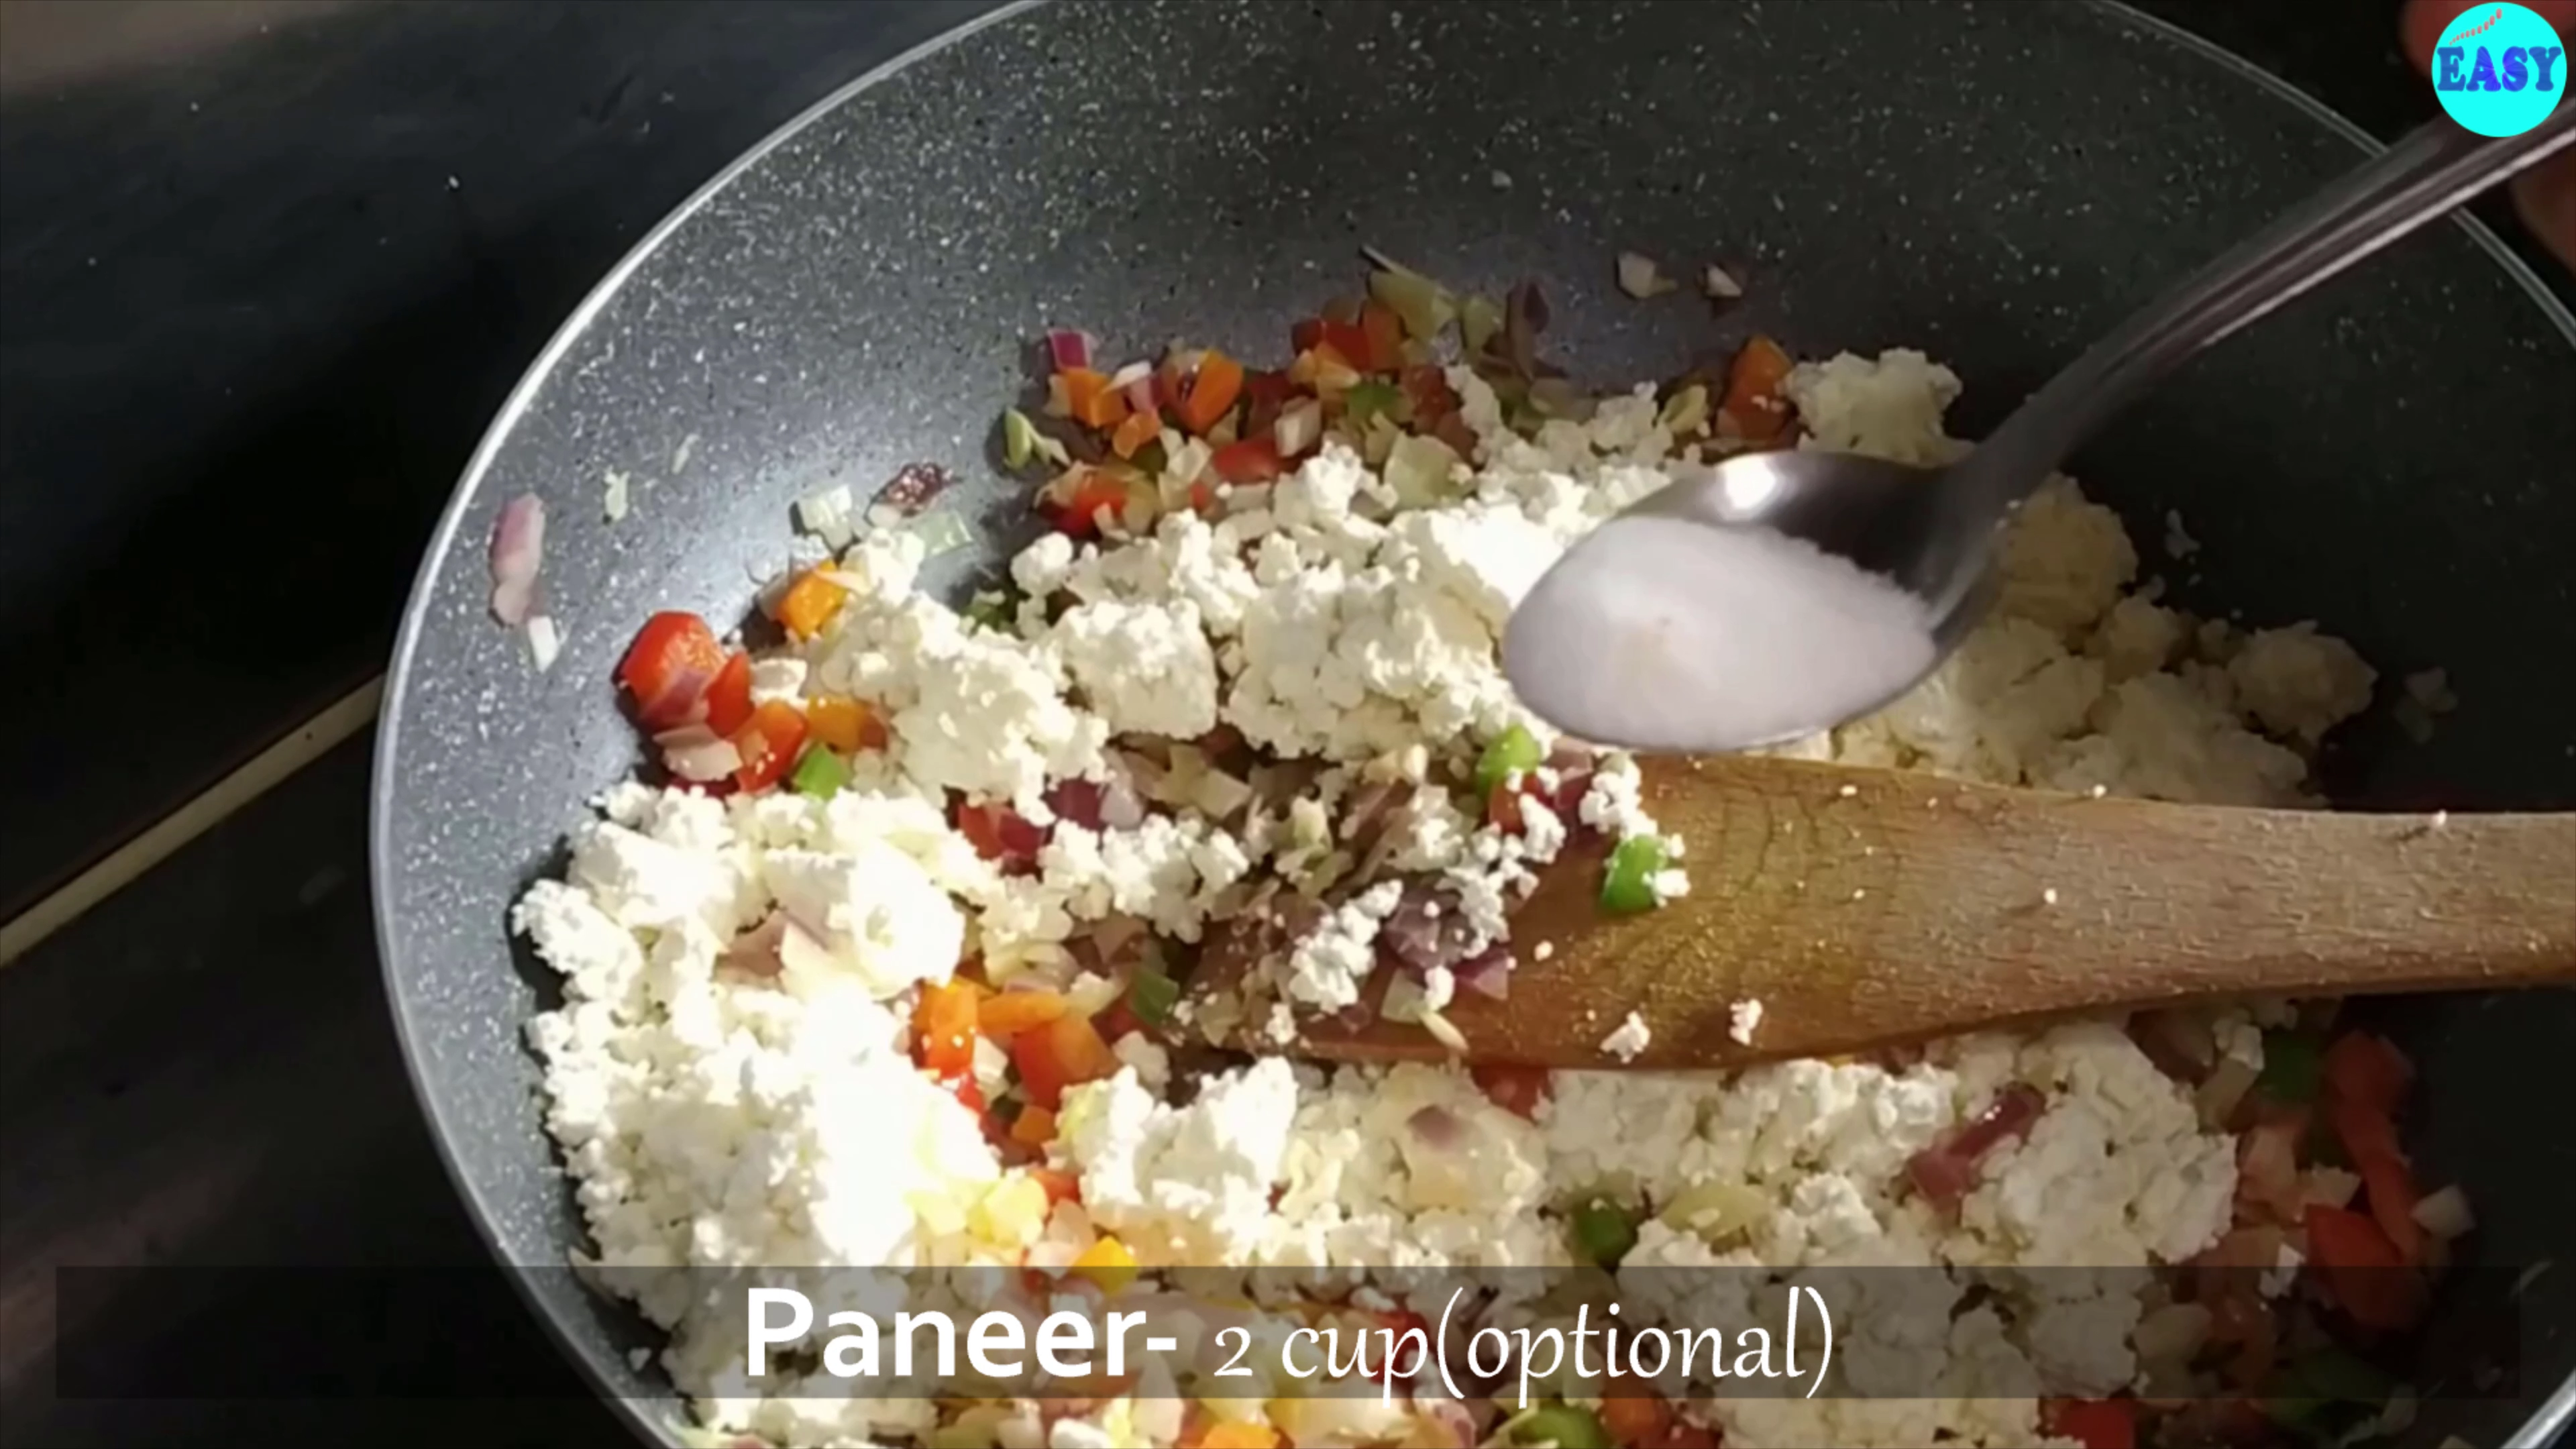 Step 5 - Now add crumbled paneer salt and pepper. mix it well and cook for another minute.(if not using paneer increase the amount of cabbage) 